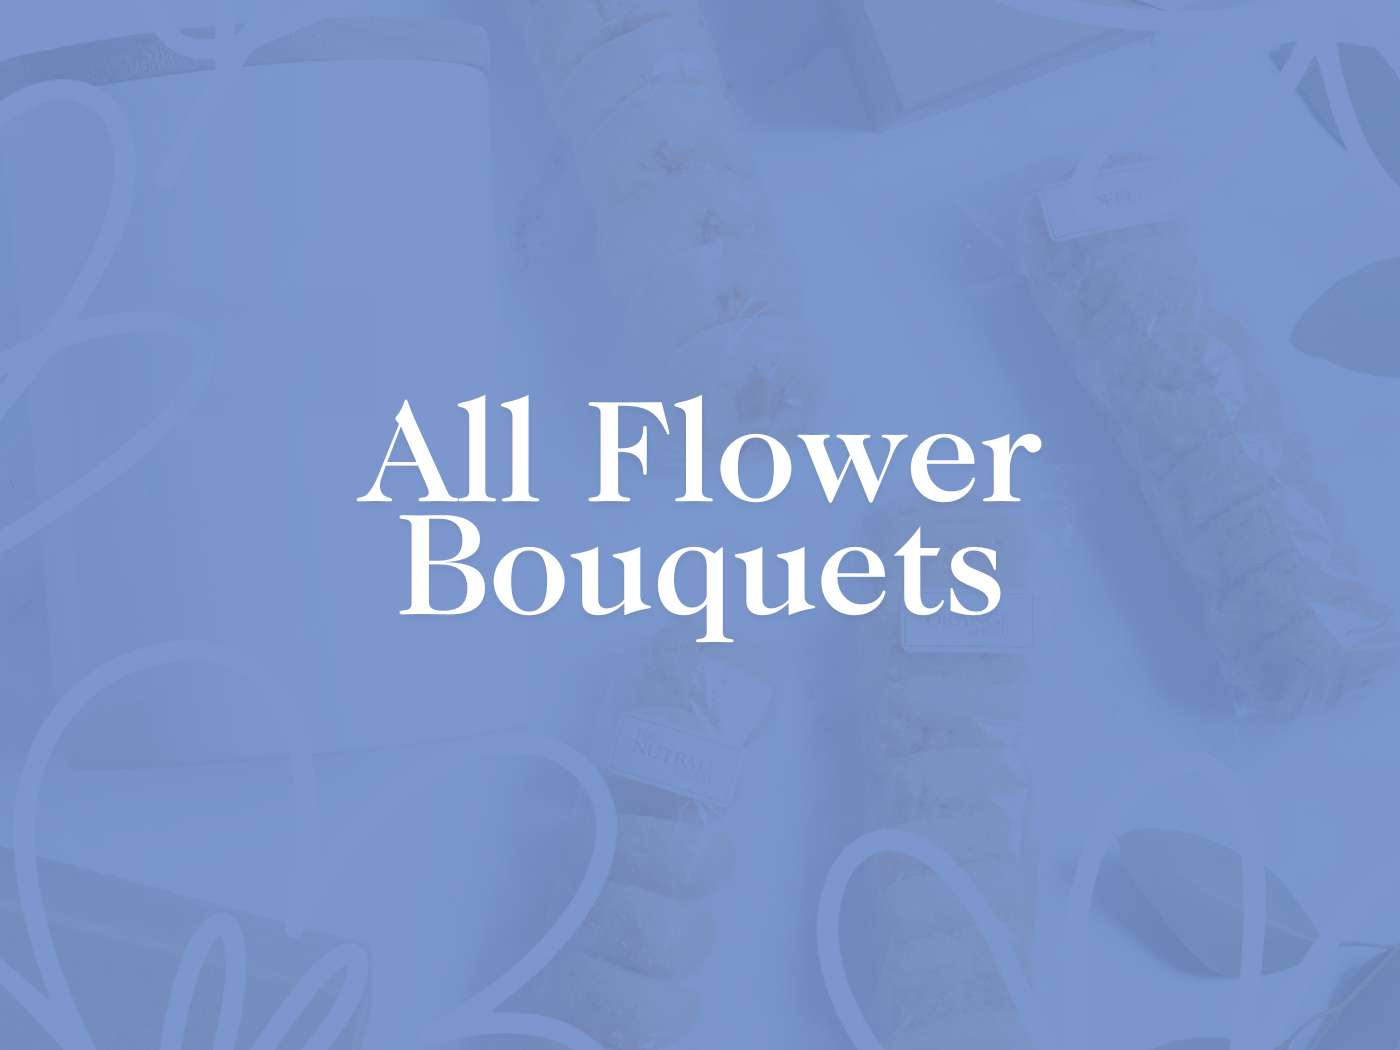 Prominent text 'All Flower Bouquets' set against a tranquil blue backdrop with faint floral outlines, showcasing the variety offered by Fabulous Flowers and Gifts.